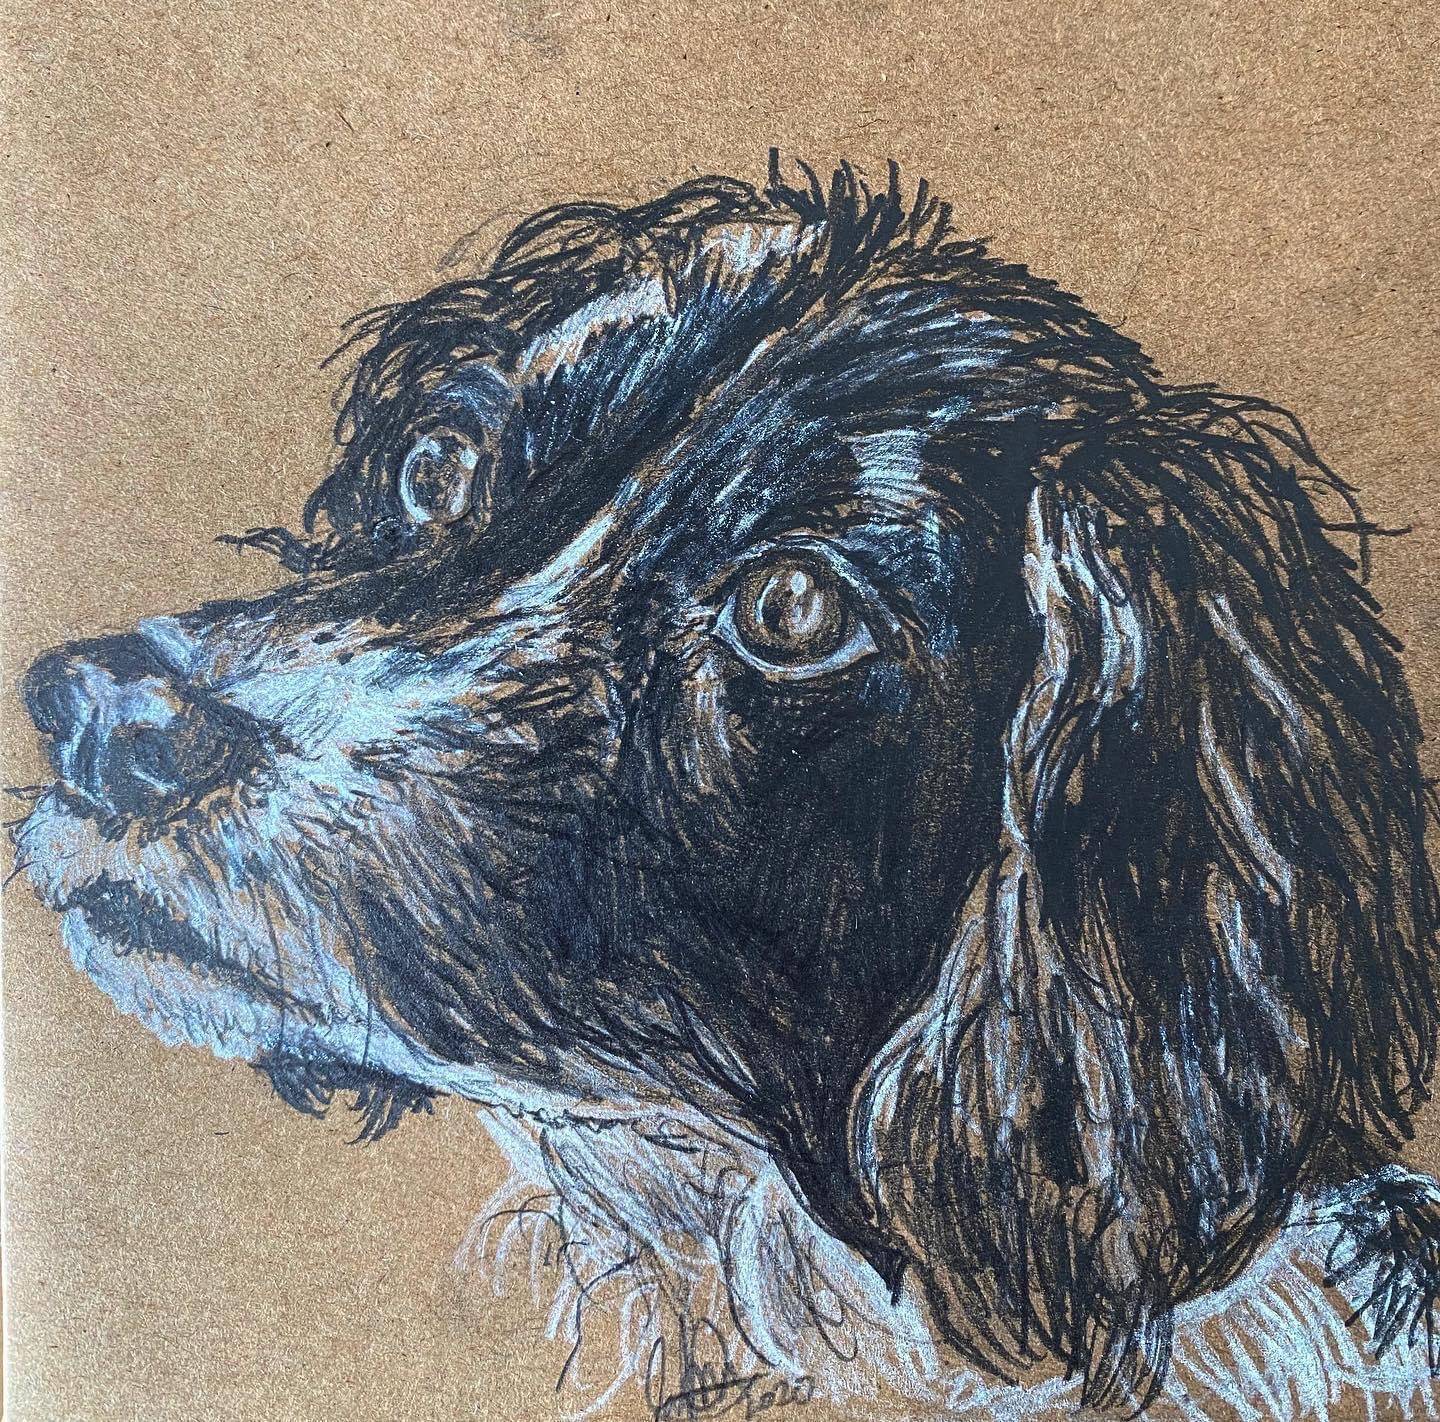 A thank you card of Daisy the Spaniel, personally drawn for The Harrogate Vet